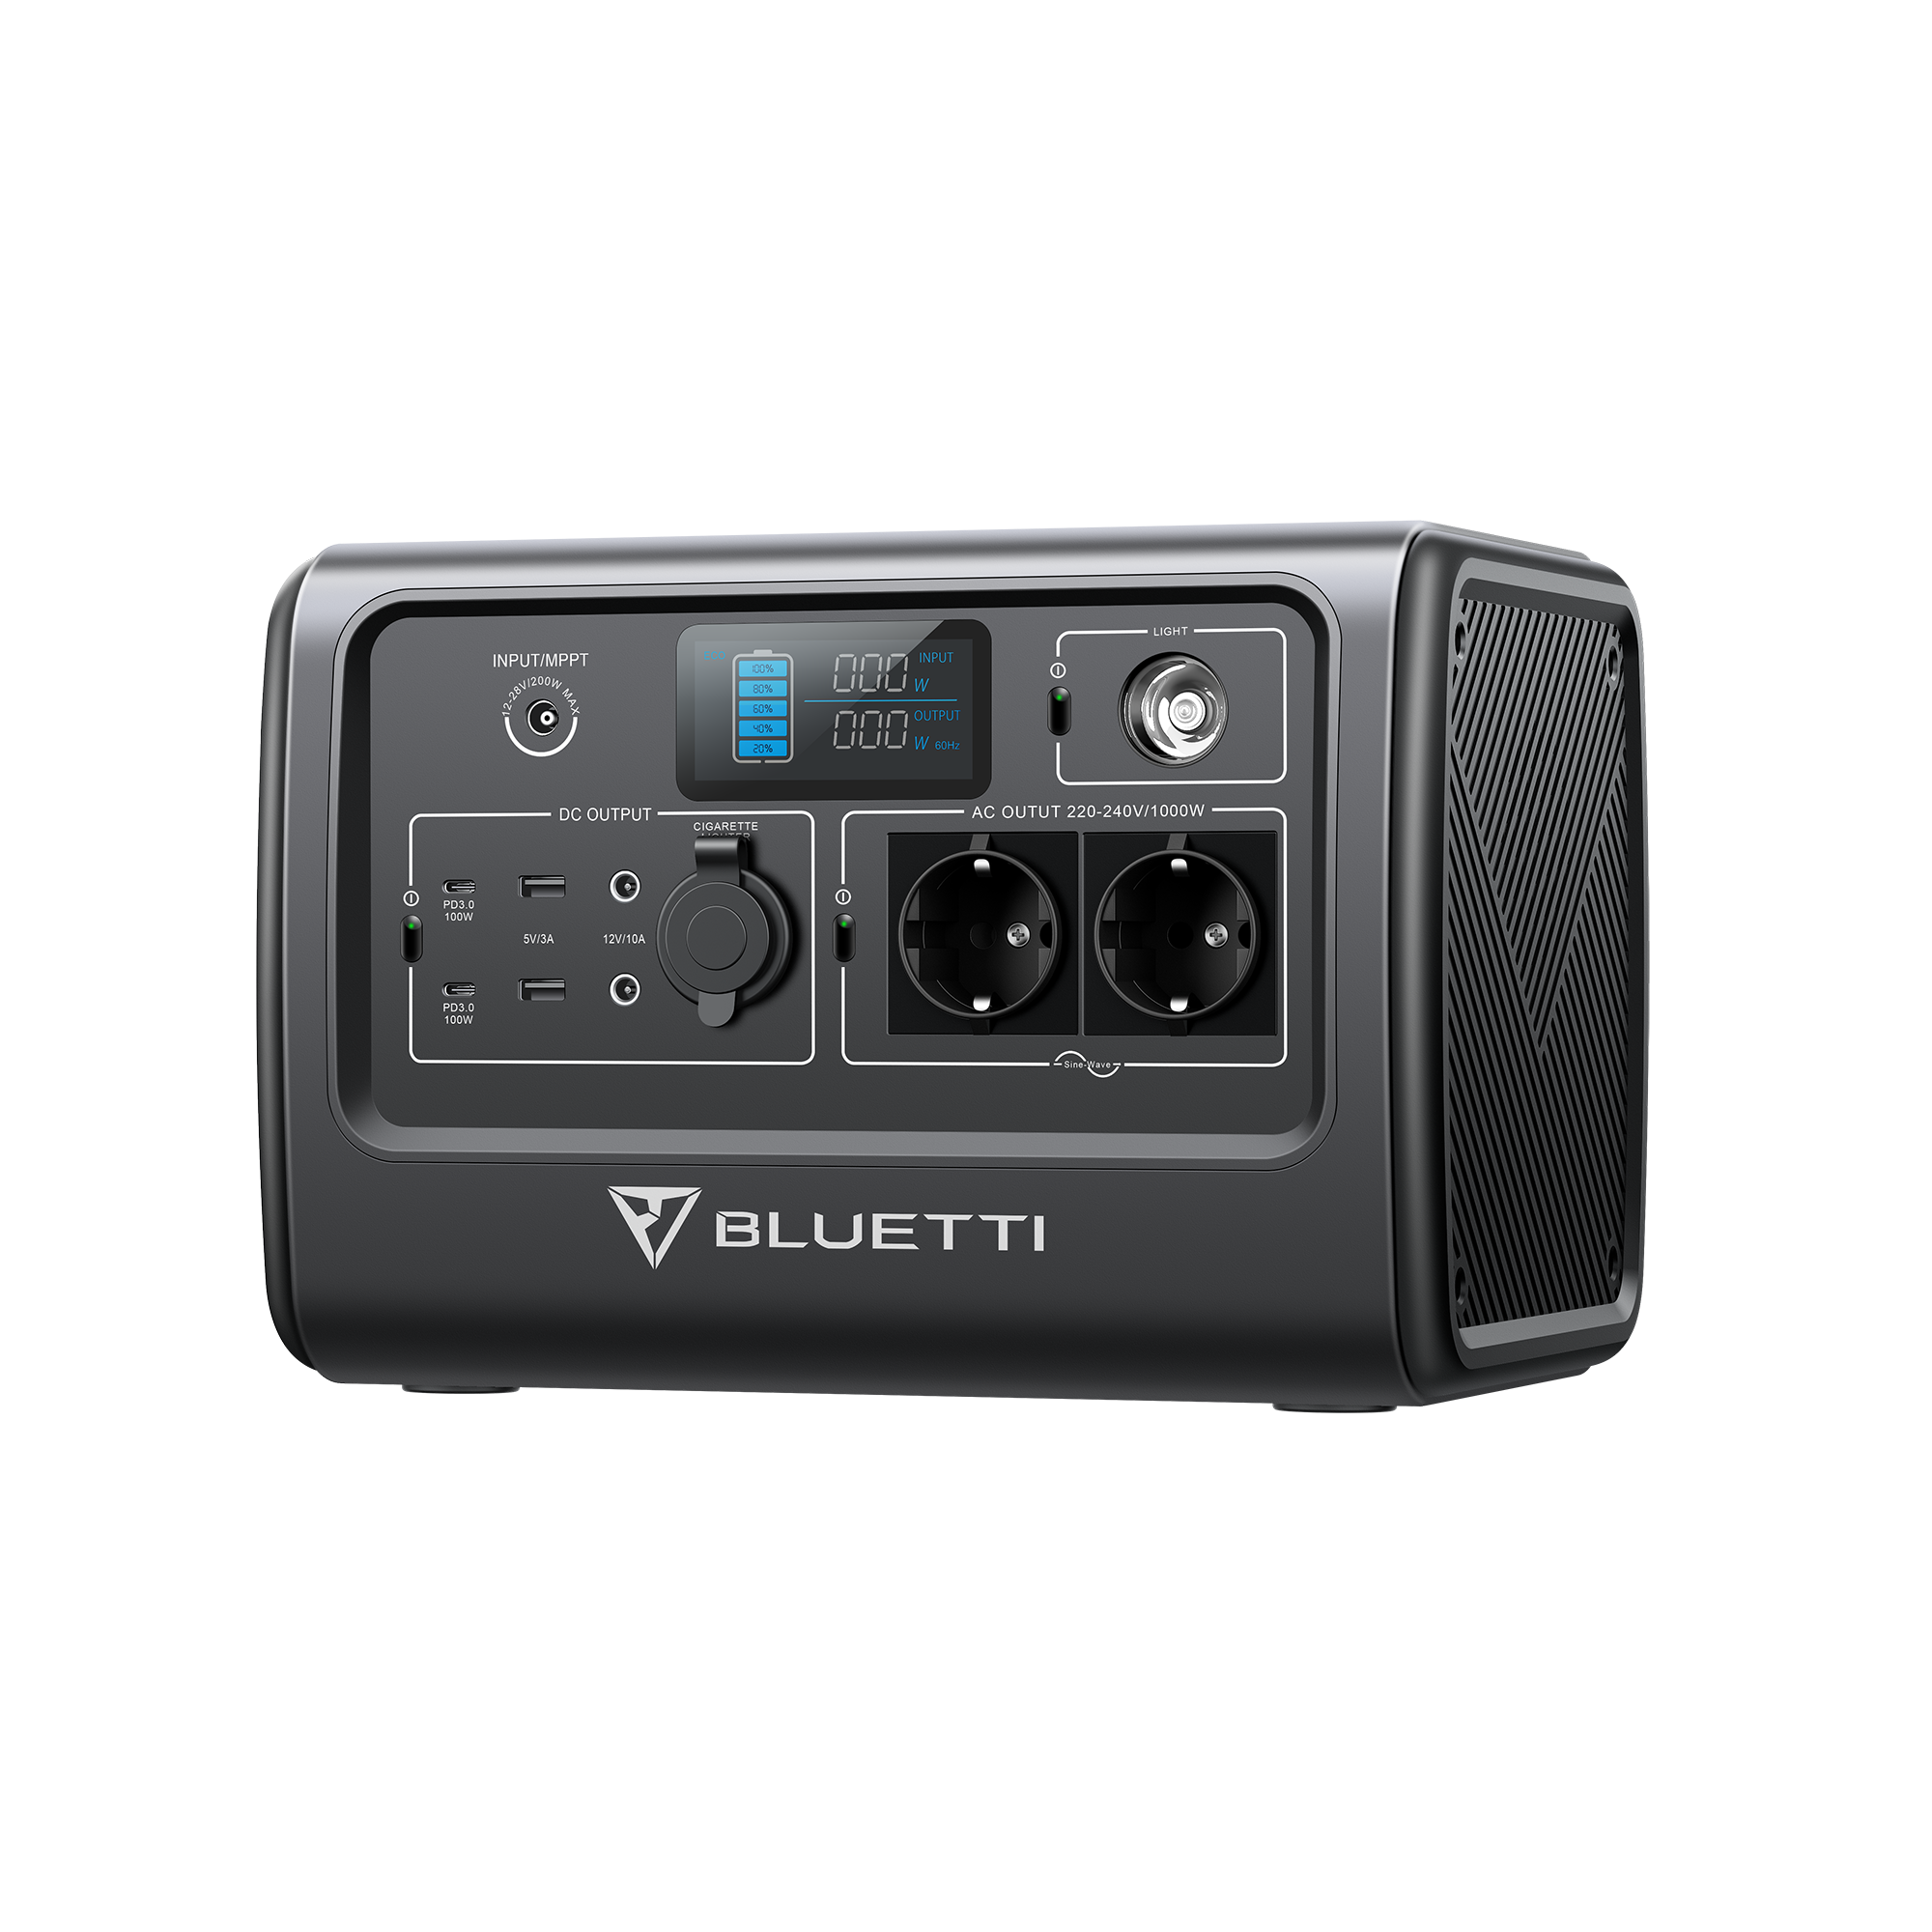 Bluetti EB70 1000W 716 Wh Portable Power Station - Powerful and Portable Energy